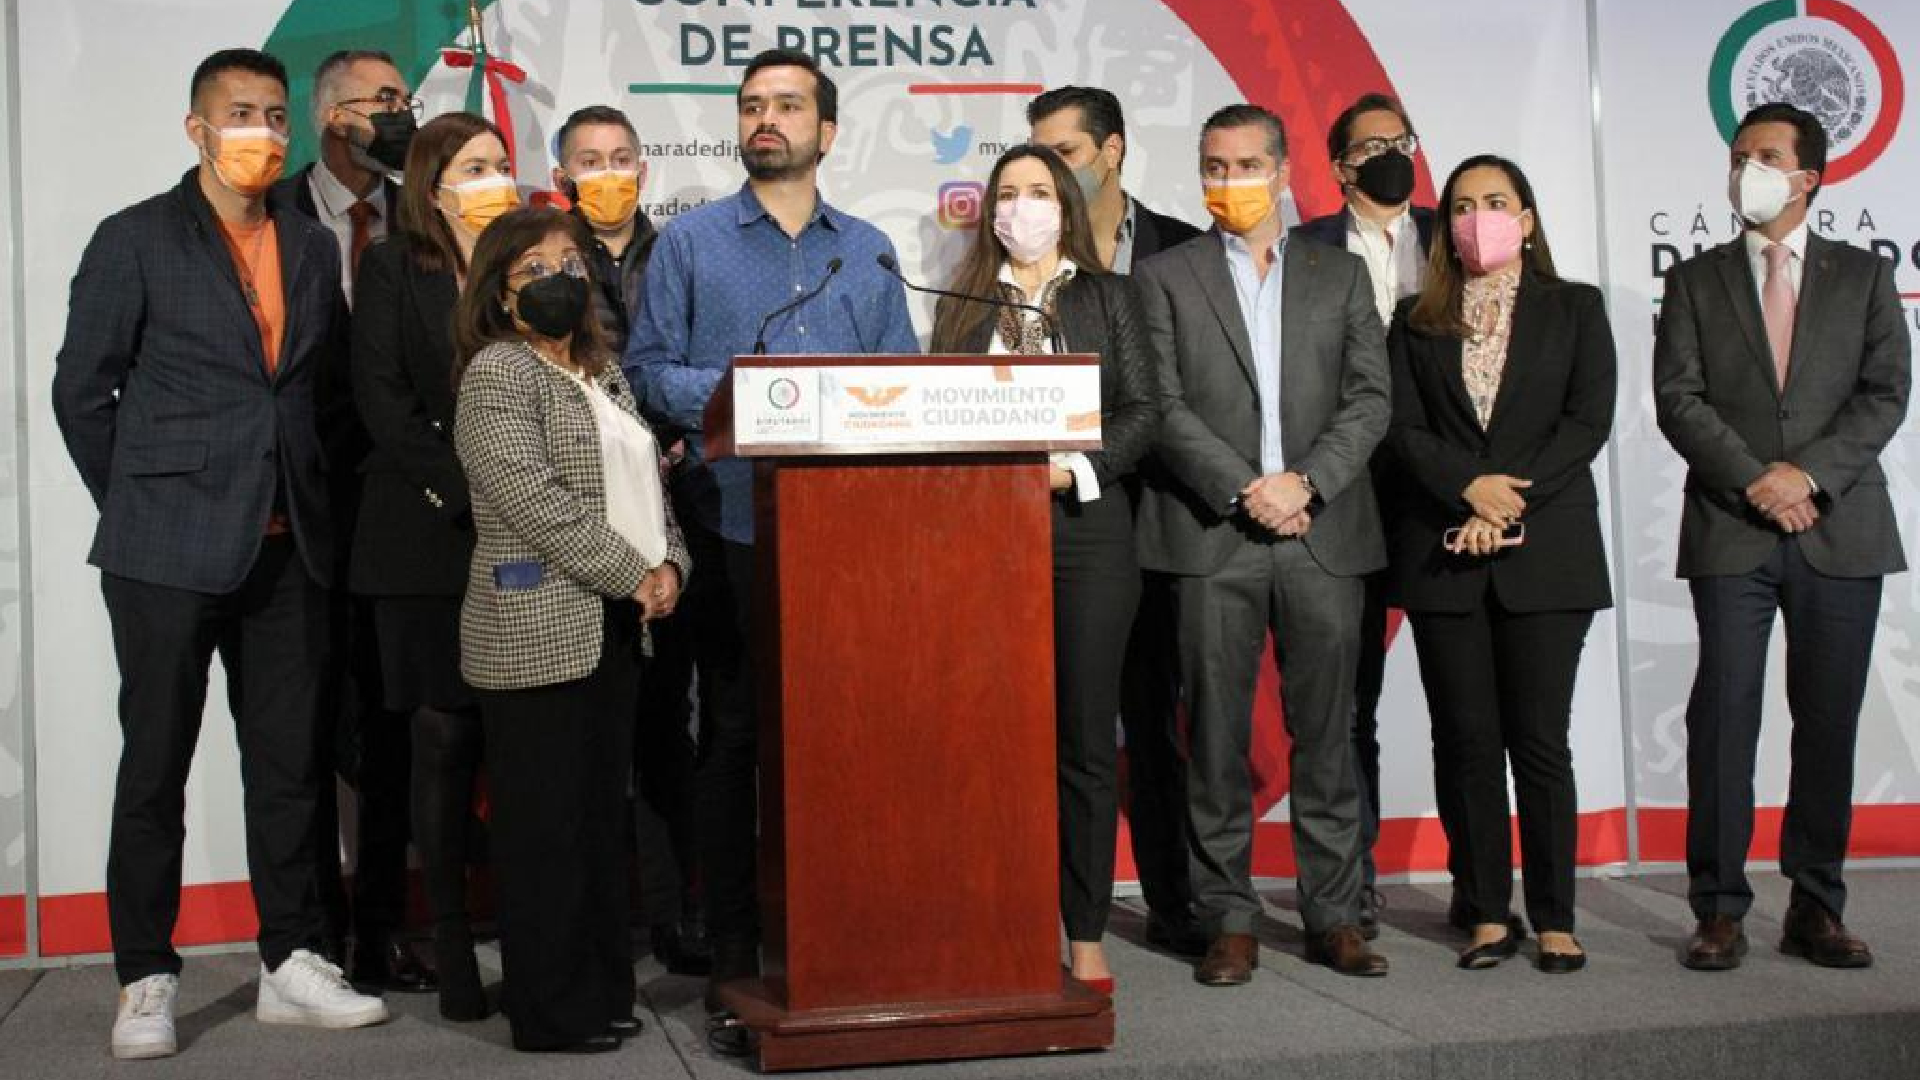 Movimiento Ciudadano presented an initiative to withdraw the professional title in case plagiarism is verified in the theses (Photo: Courtesy Movimiento Ciudadano)